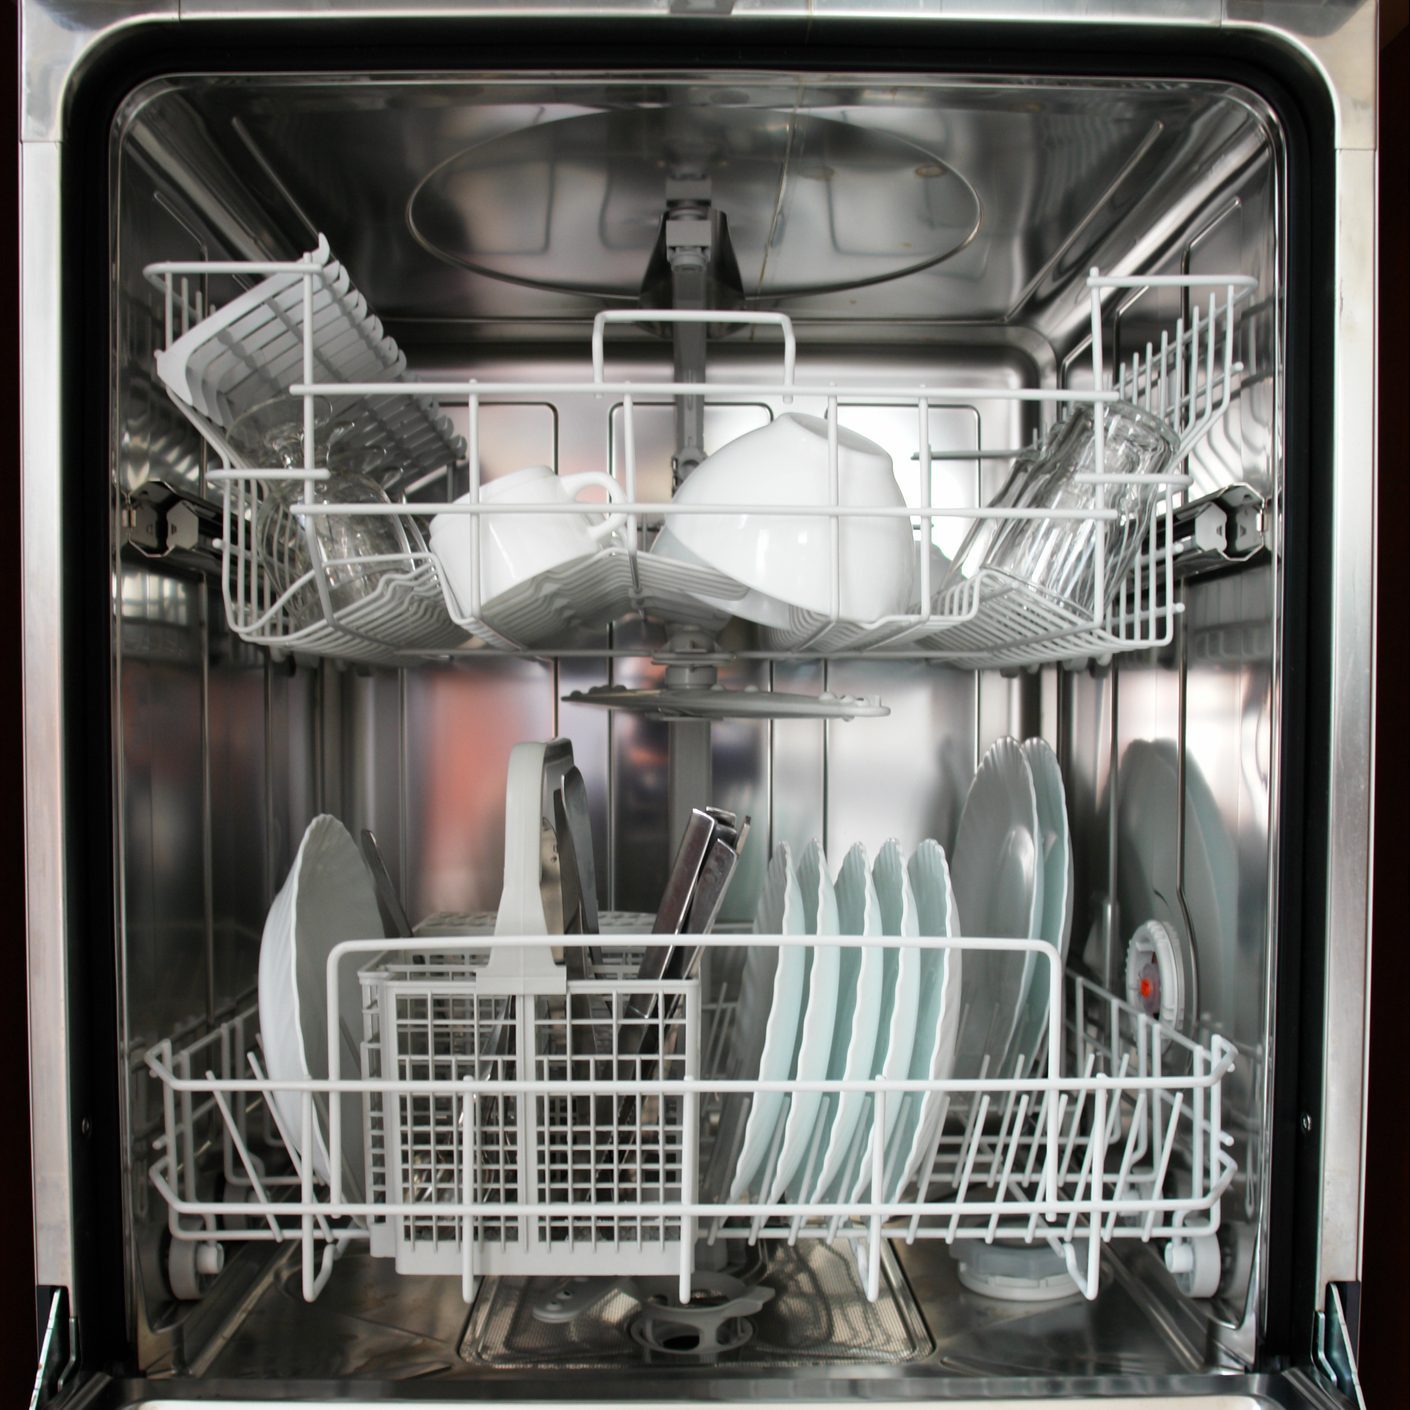 How To Fix a Dishwasher That Doesn’t Dissolve the Soap